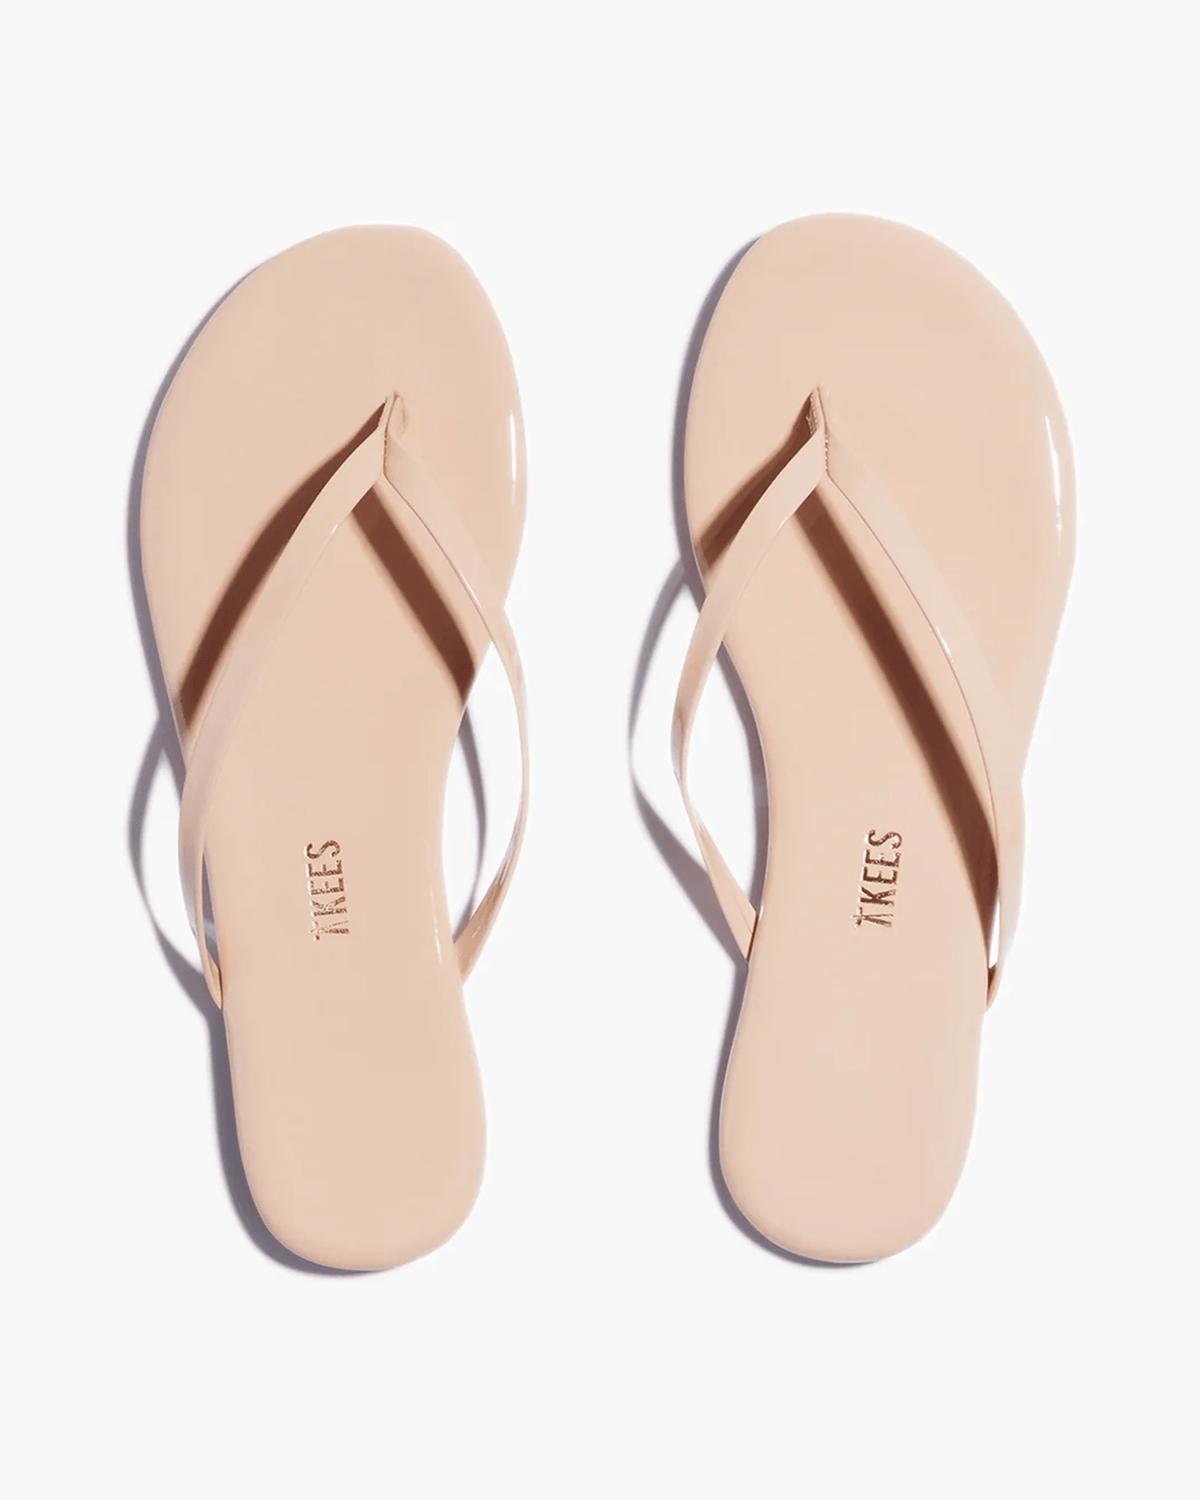 Tkees Shoes Glosses Flip Flop in Rose